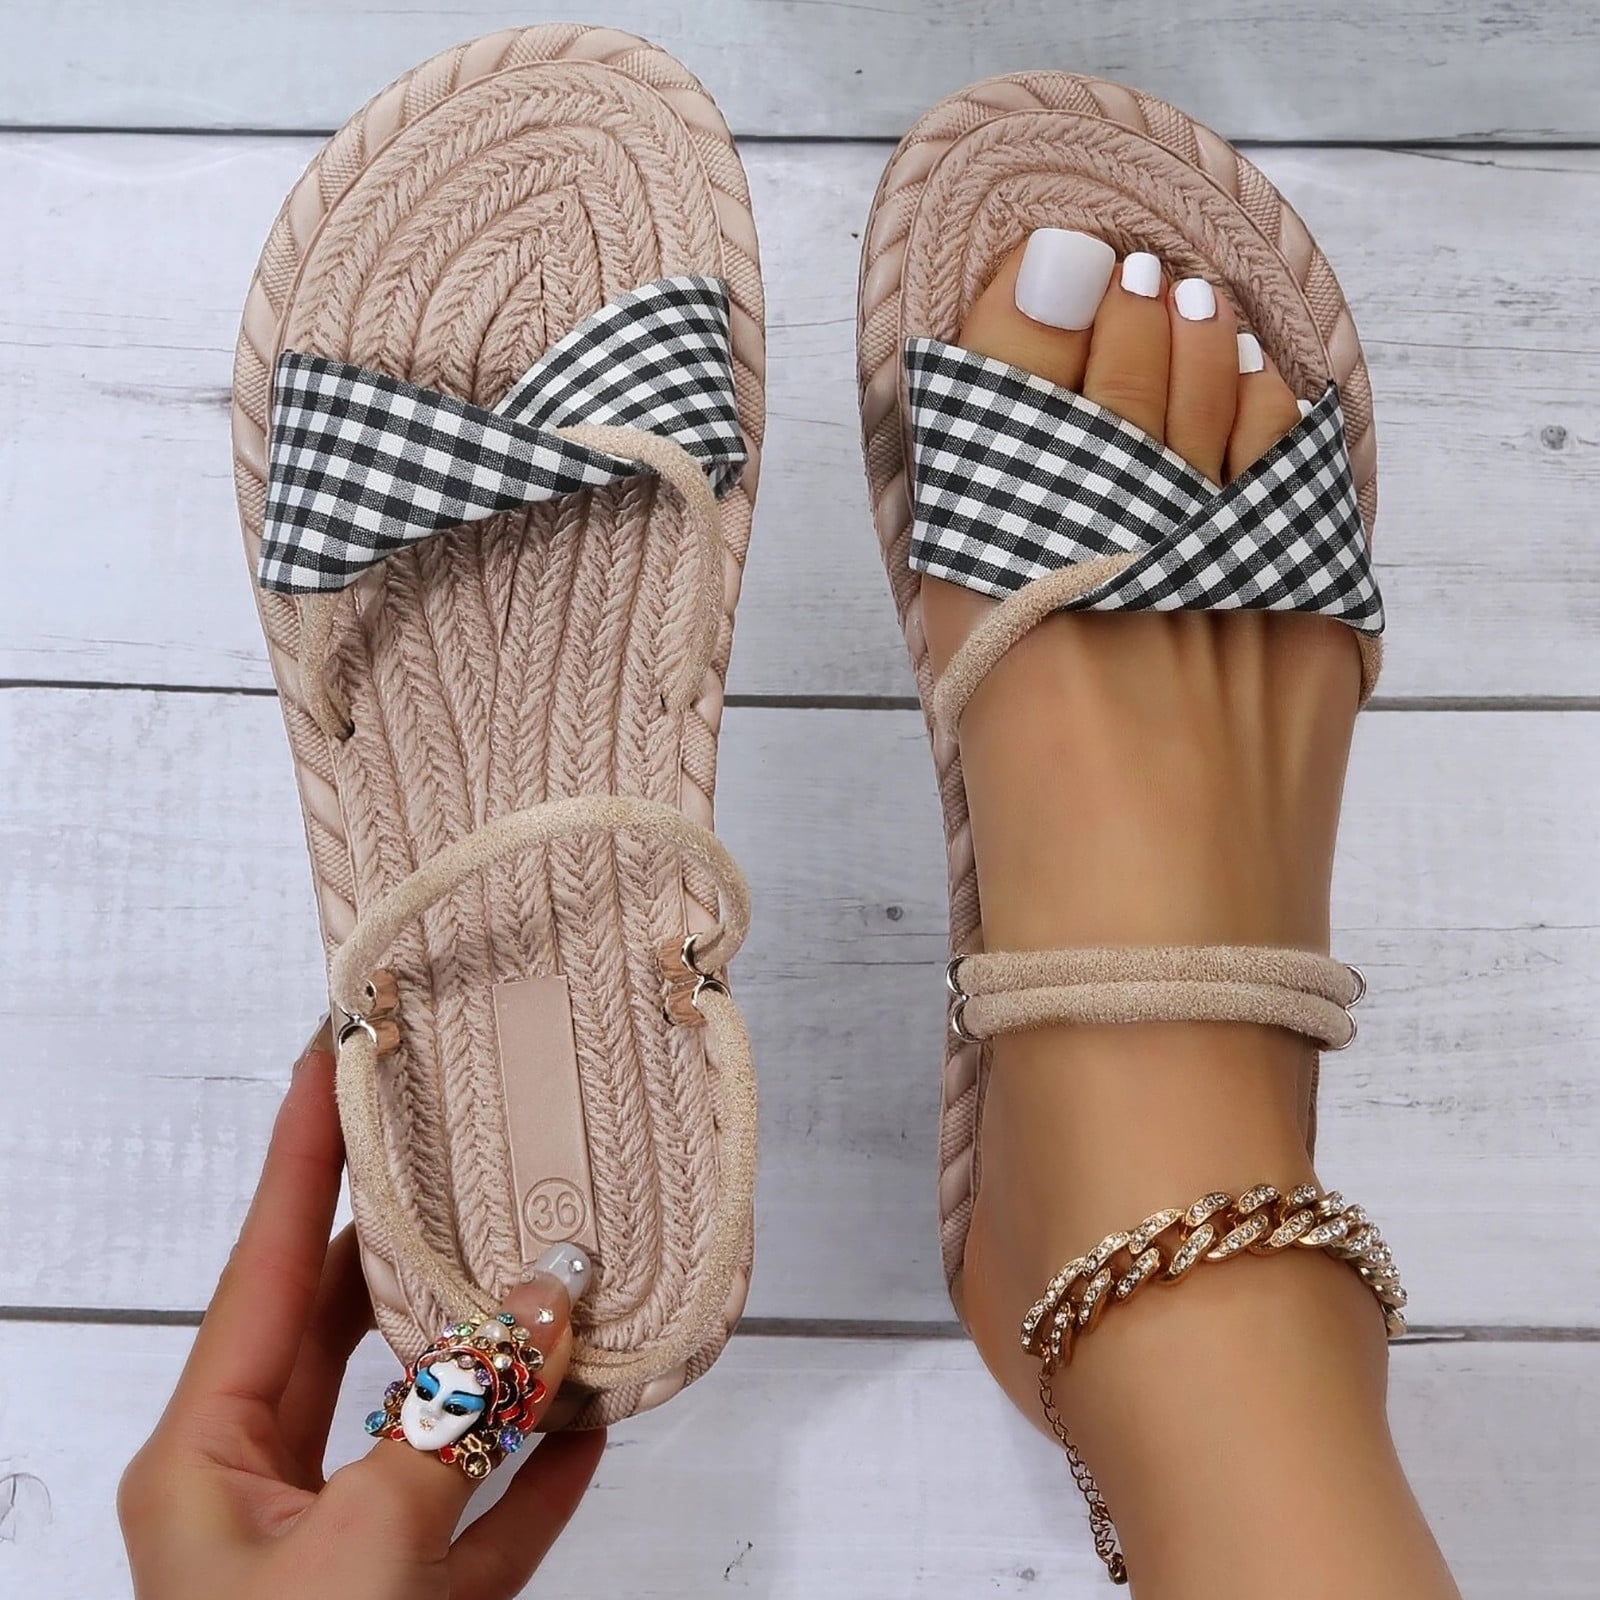 Women Shoes Gingham Two Way Wear Slide Sandals For Women Casual Bohemian Sandals Minimalist Cross Strap Slides Beach Shoes Slippers Black 7 3e012ab5 ddf5 43f2 9cd5 a4cd1fc22841.38acb1798b4fd45e2f90da1eb2cc727e